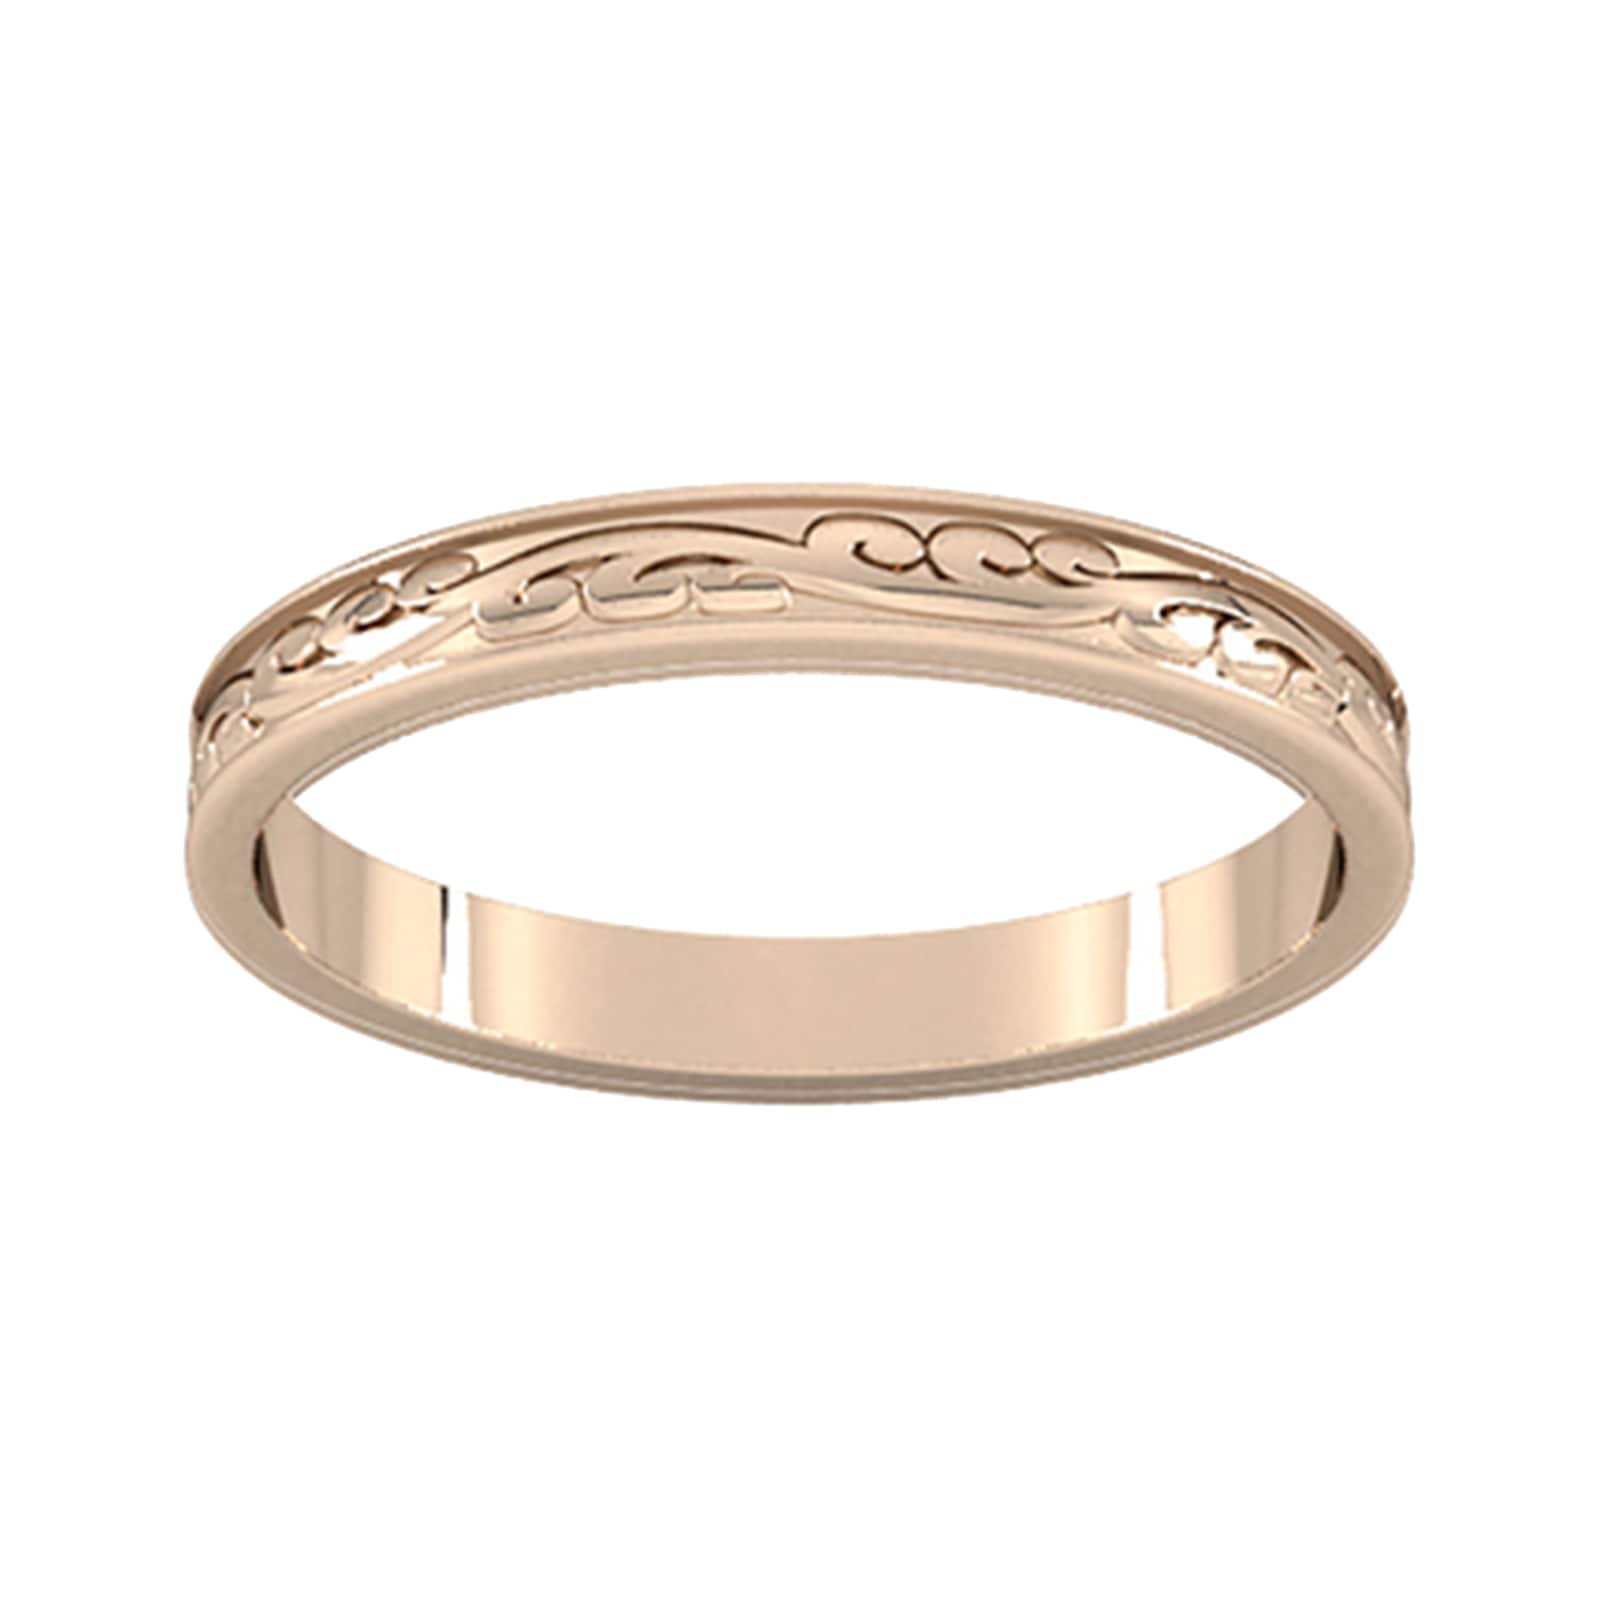 2.5mm Hand Engraved Wedding Ring In 18 Carat Rose Gold - Ring Size Q